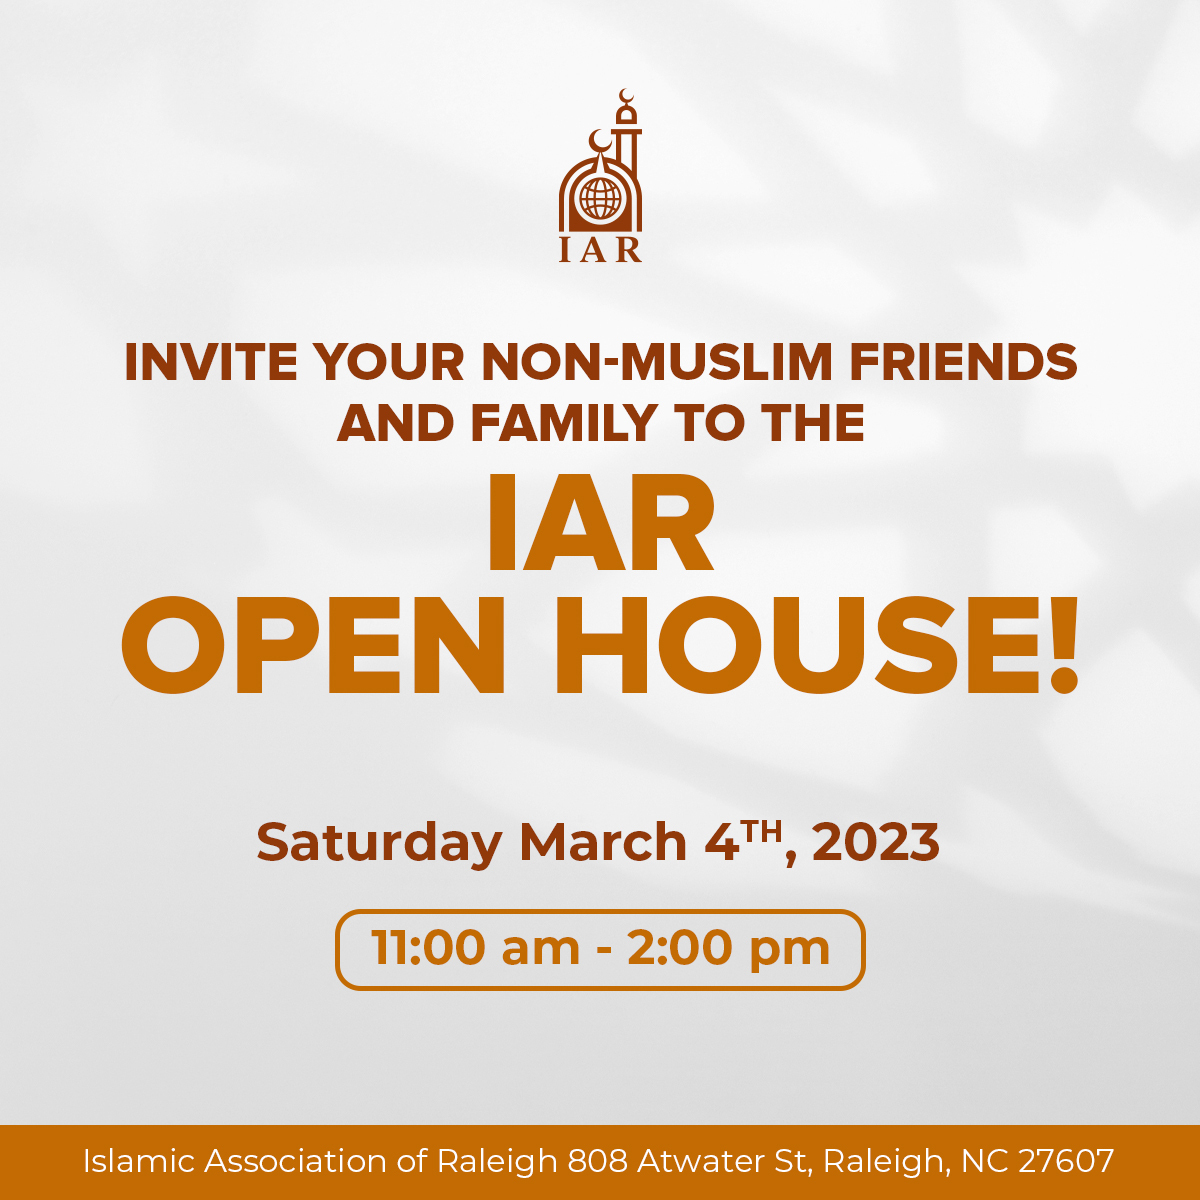 IAR Open House 2023: Invite Your Non-Muslim Friends and Family!